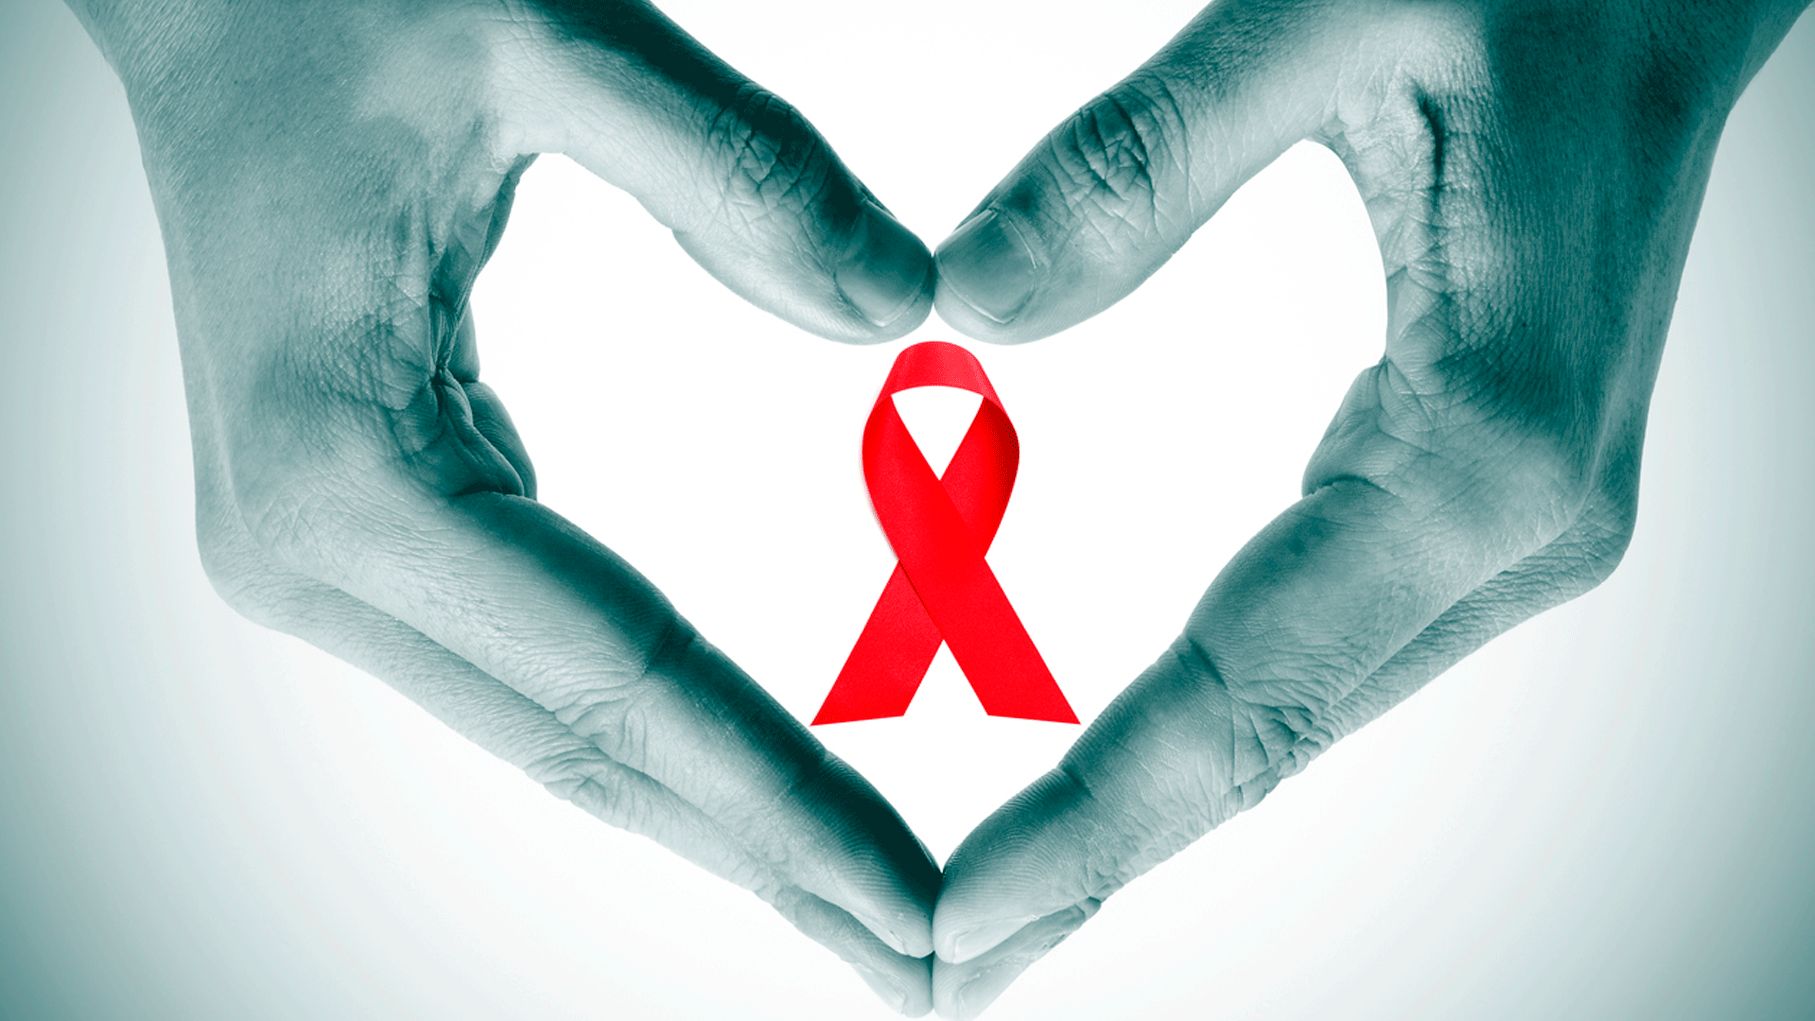 While the number of people getting HIV treatment is increasing, 9.4 million people globally are still unaware about their condition.